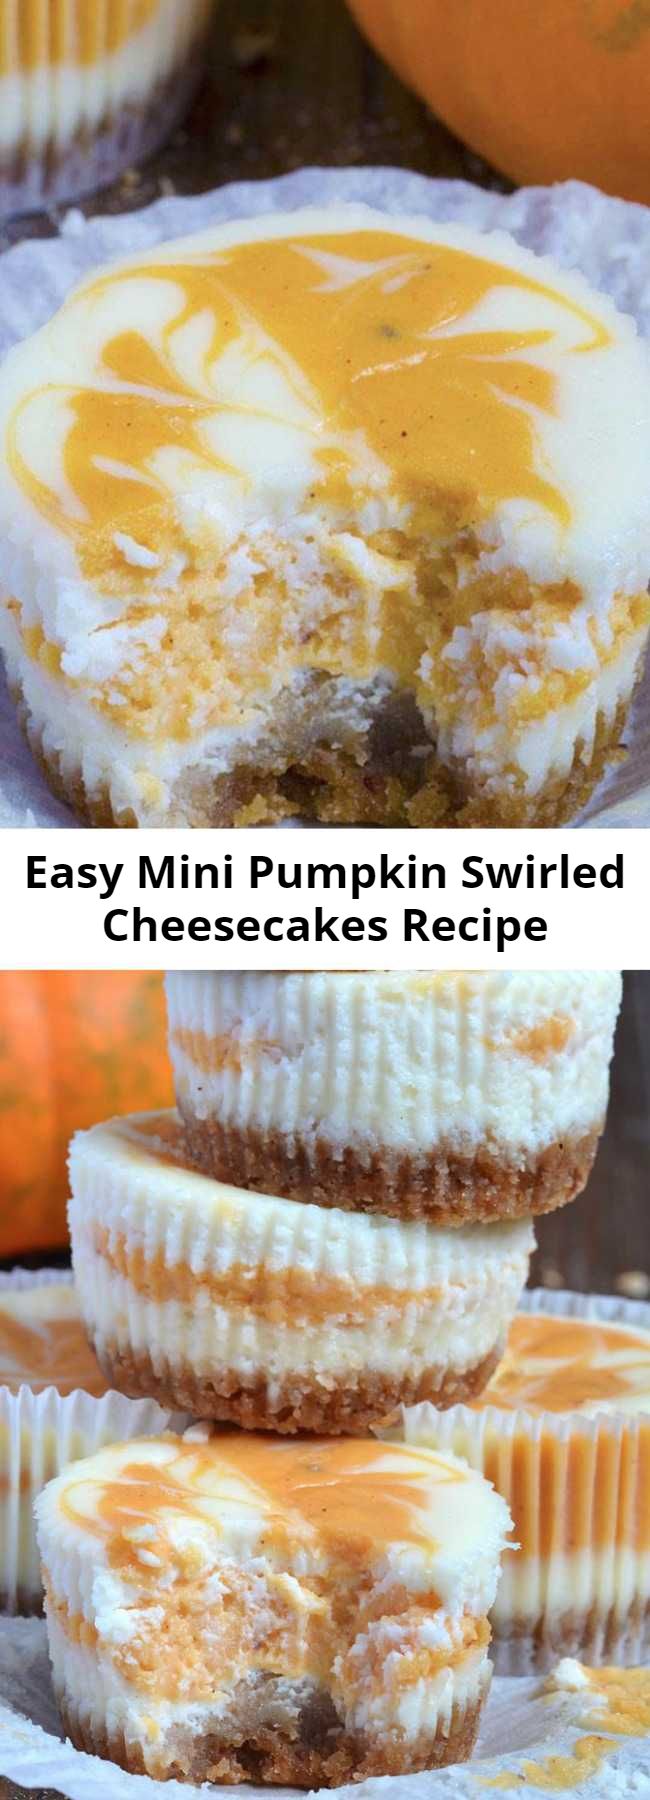 Easy Mini Pumpkin Swirled Cheesecakes Recipe - I always adore sweet cheesecake bites but with pumpkin I got more than I expect! These gorgeous Mini Pumpkin Swirled Cheesecakes are the best homemade treat to satisfy your fall flavor cravings. Perfectly swirled and spiced for a delicious pumpkin dessert!